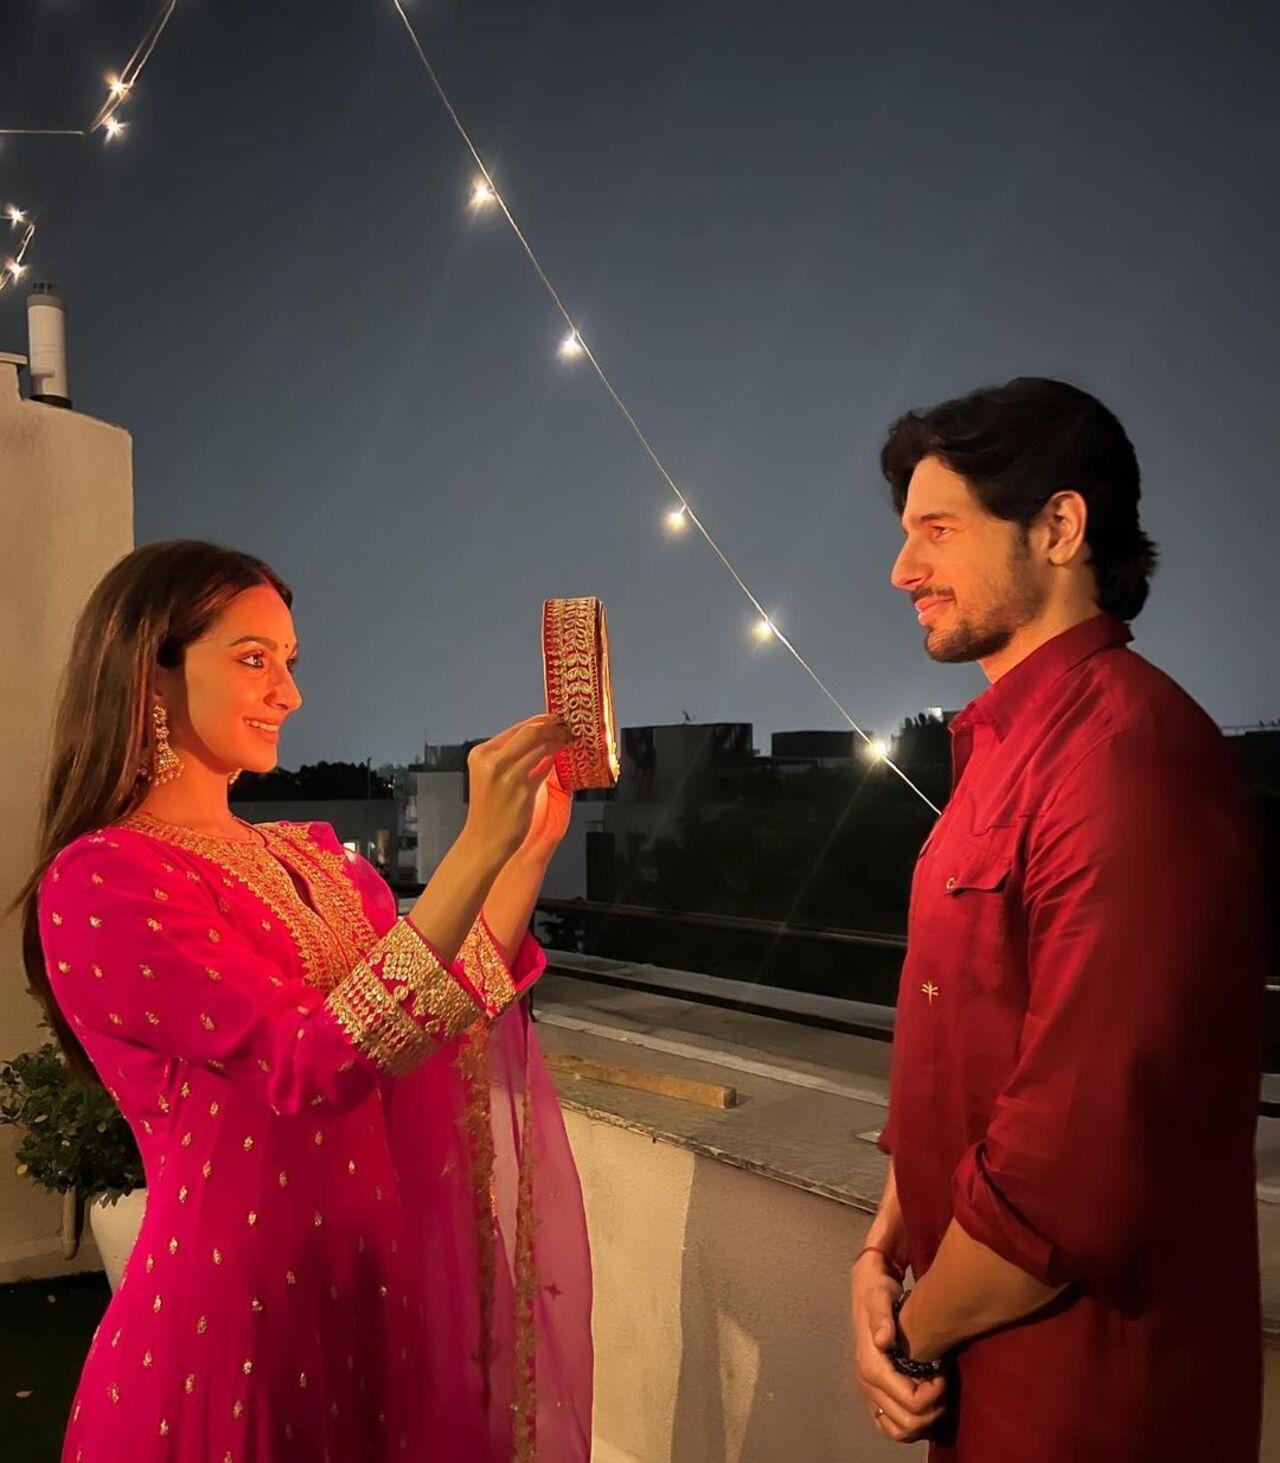 Kiara Advani and Sidharth Malhotra also celebrated their first Karwa Chauth as a married couple. The duo got married in February this year